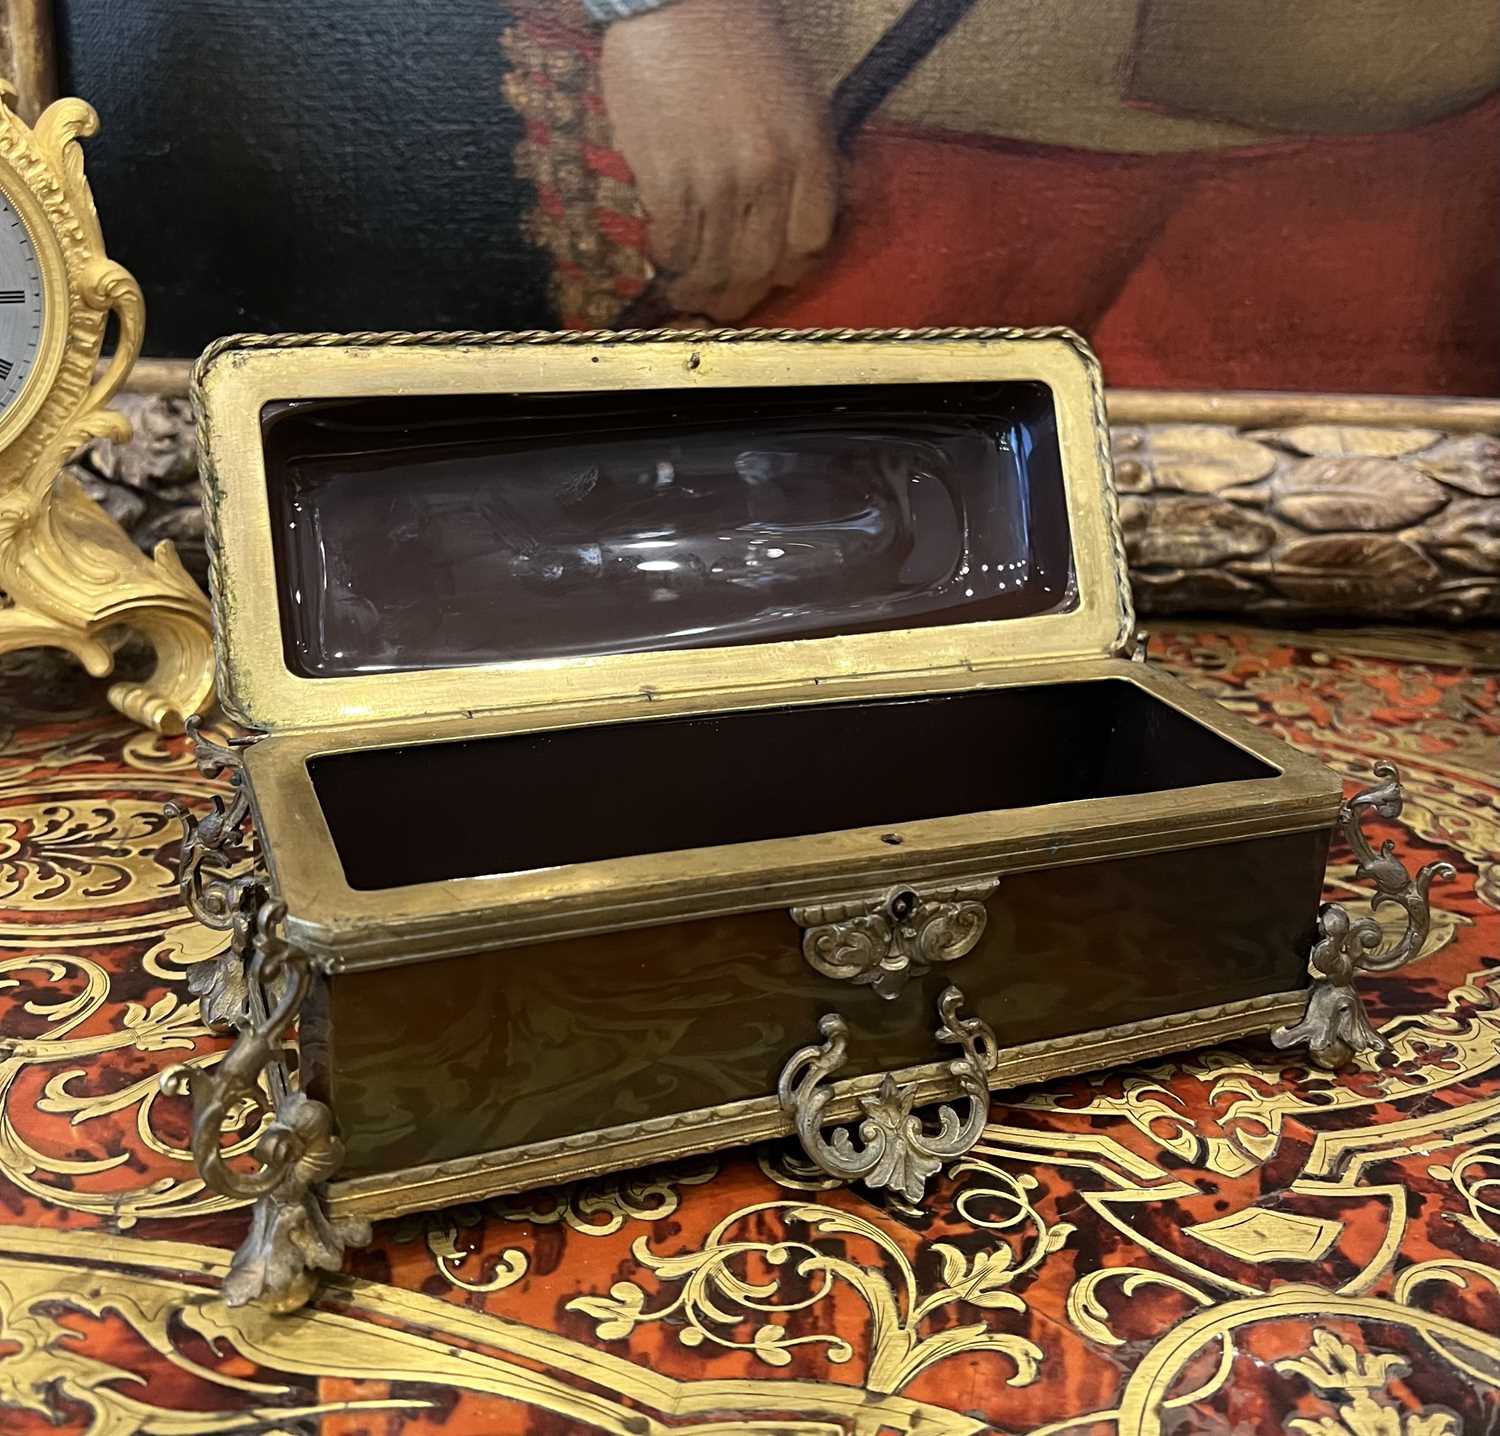 A FINE 19TH CENTURY BOHEMIAN LITHYALIN AND ORMOLU MOUNTED CASKET - Image 2 of 4